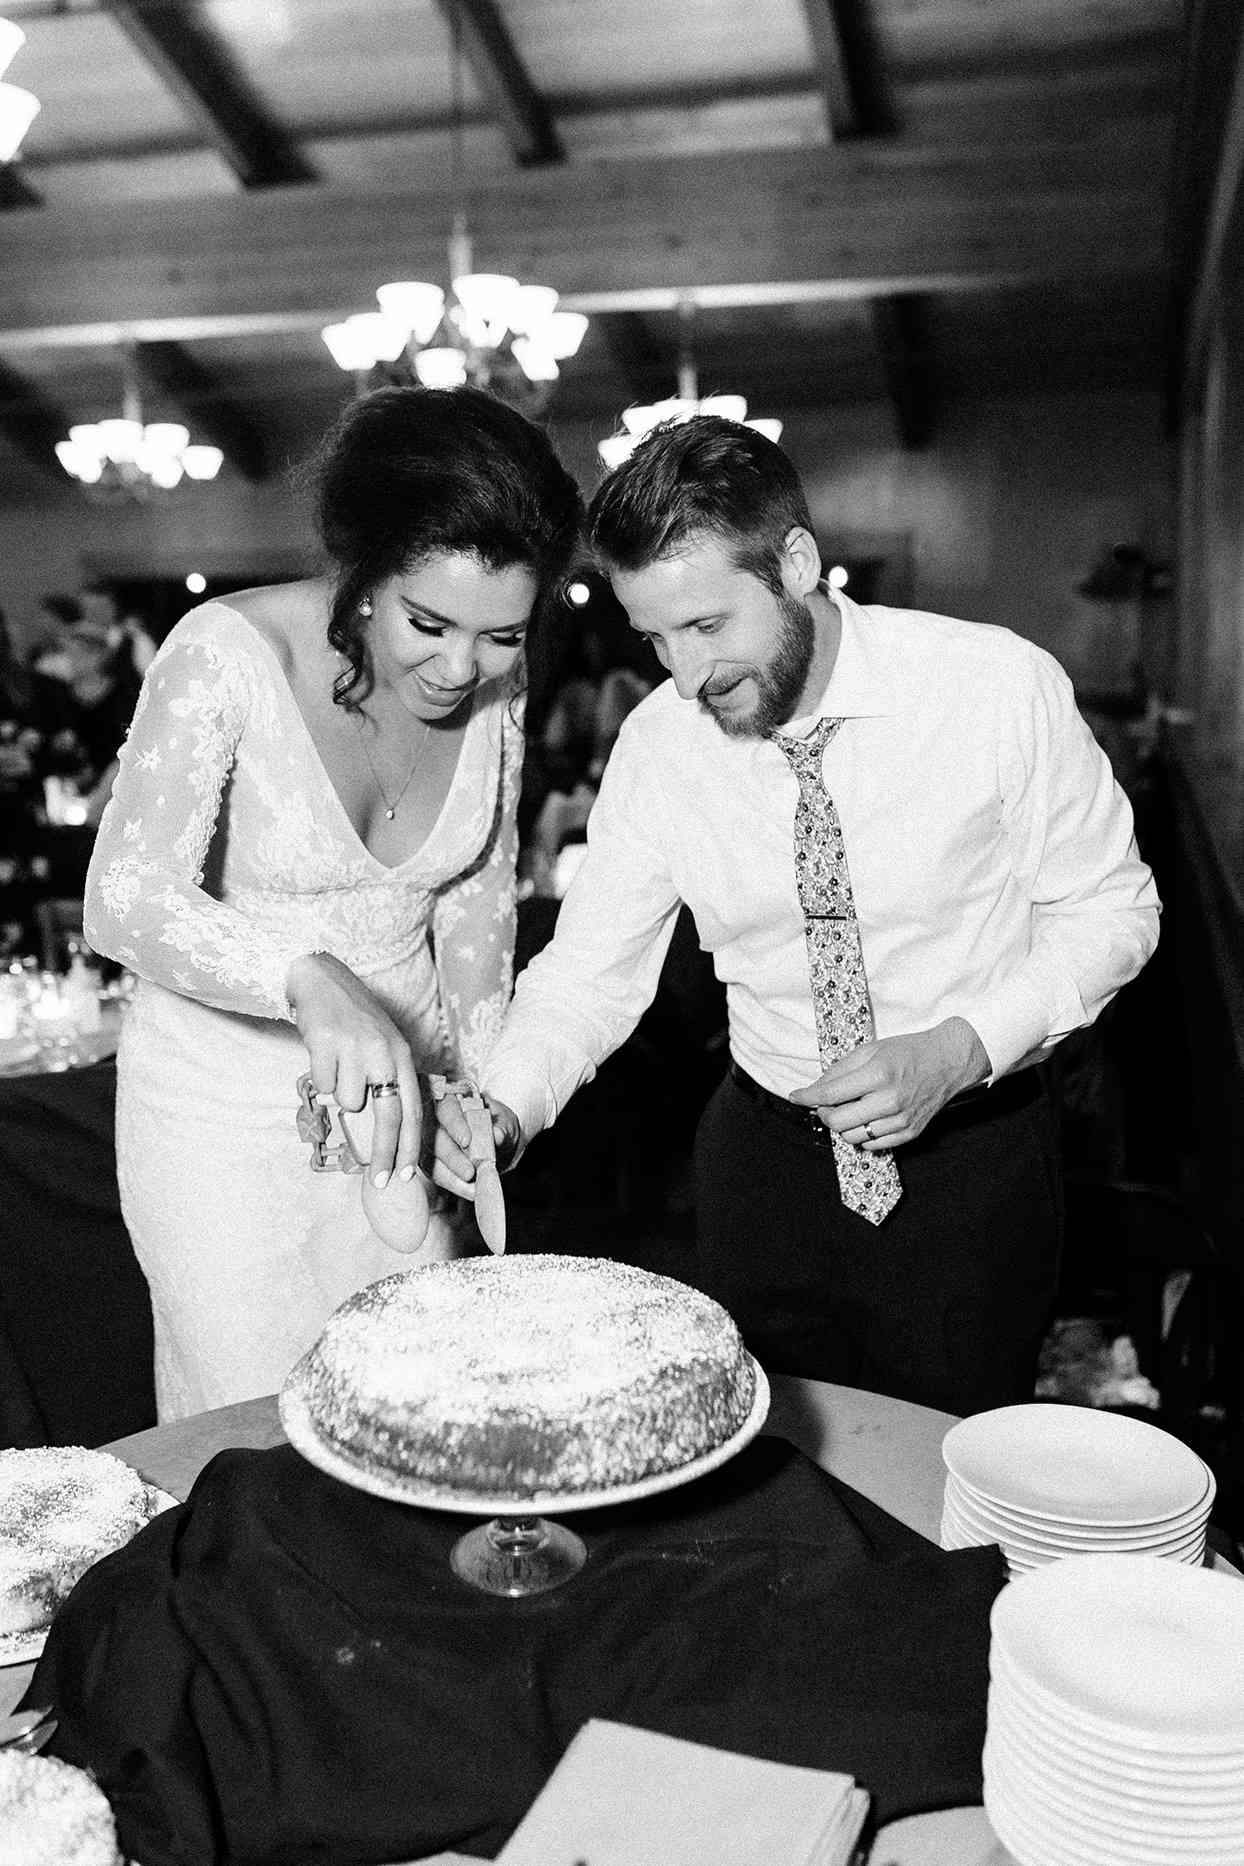 bride and groom cutting wedding cake at reception